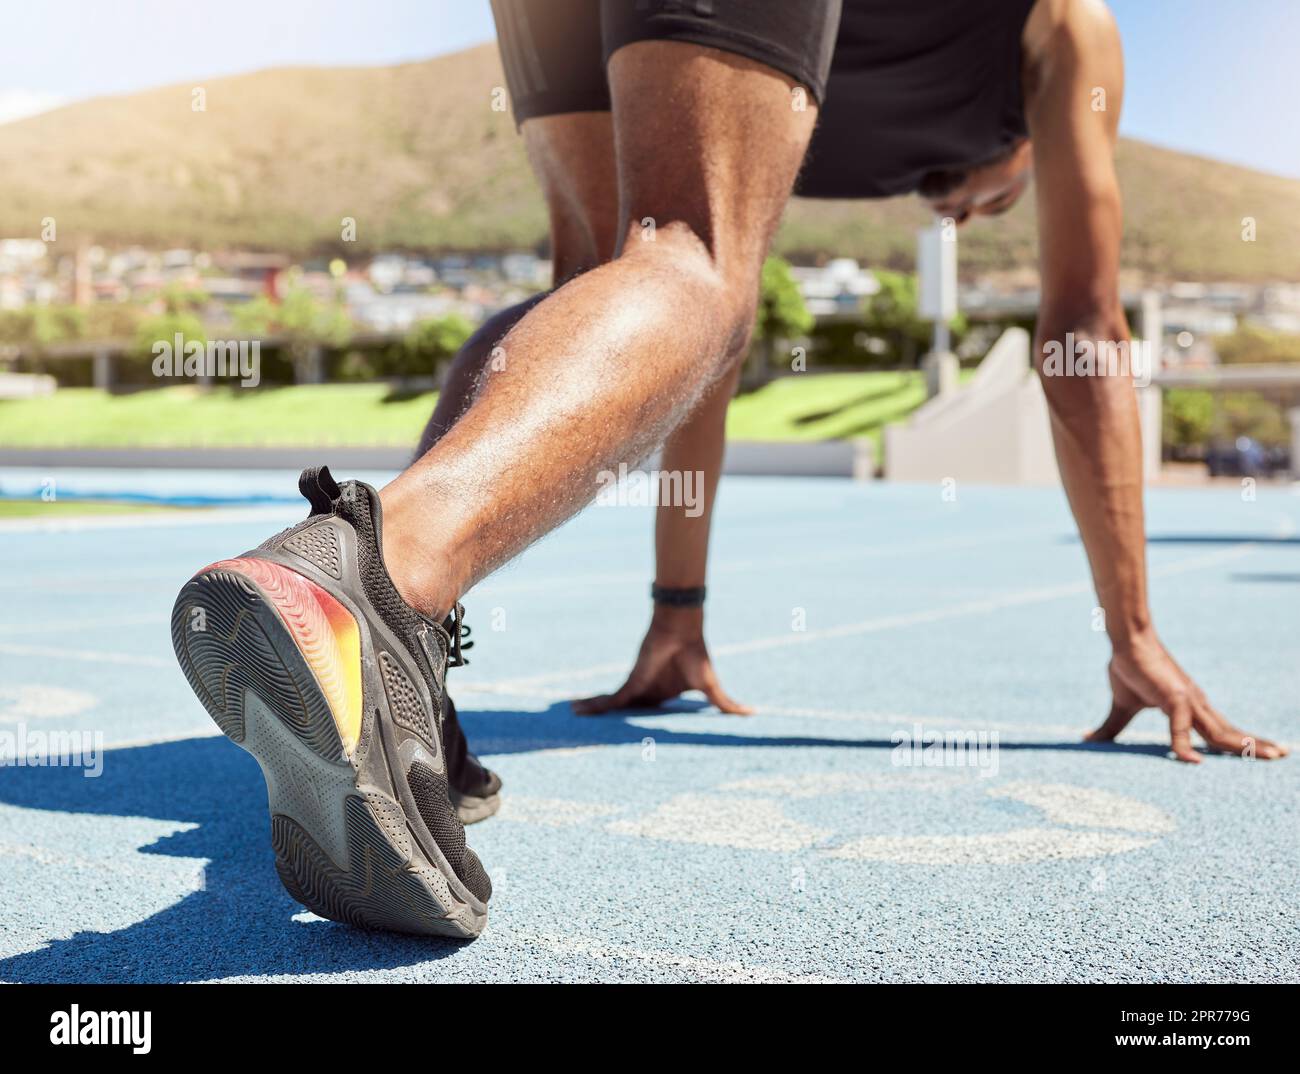 Close up of an athlete getting ready to run track and field with his feet on starting blocks ready to start sprinting. Close up of a man in starting position for running a race on a sports track Stock Photo